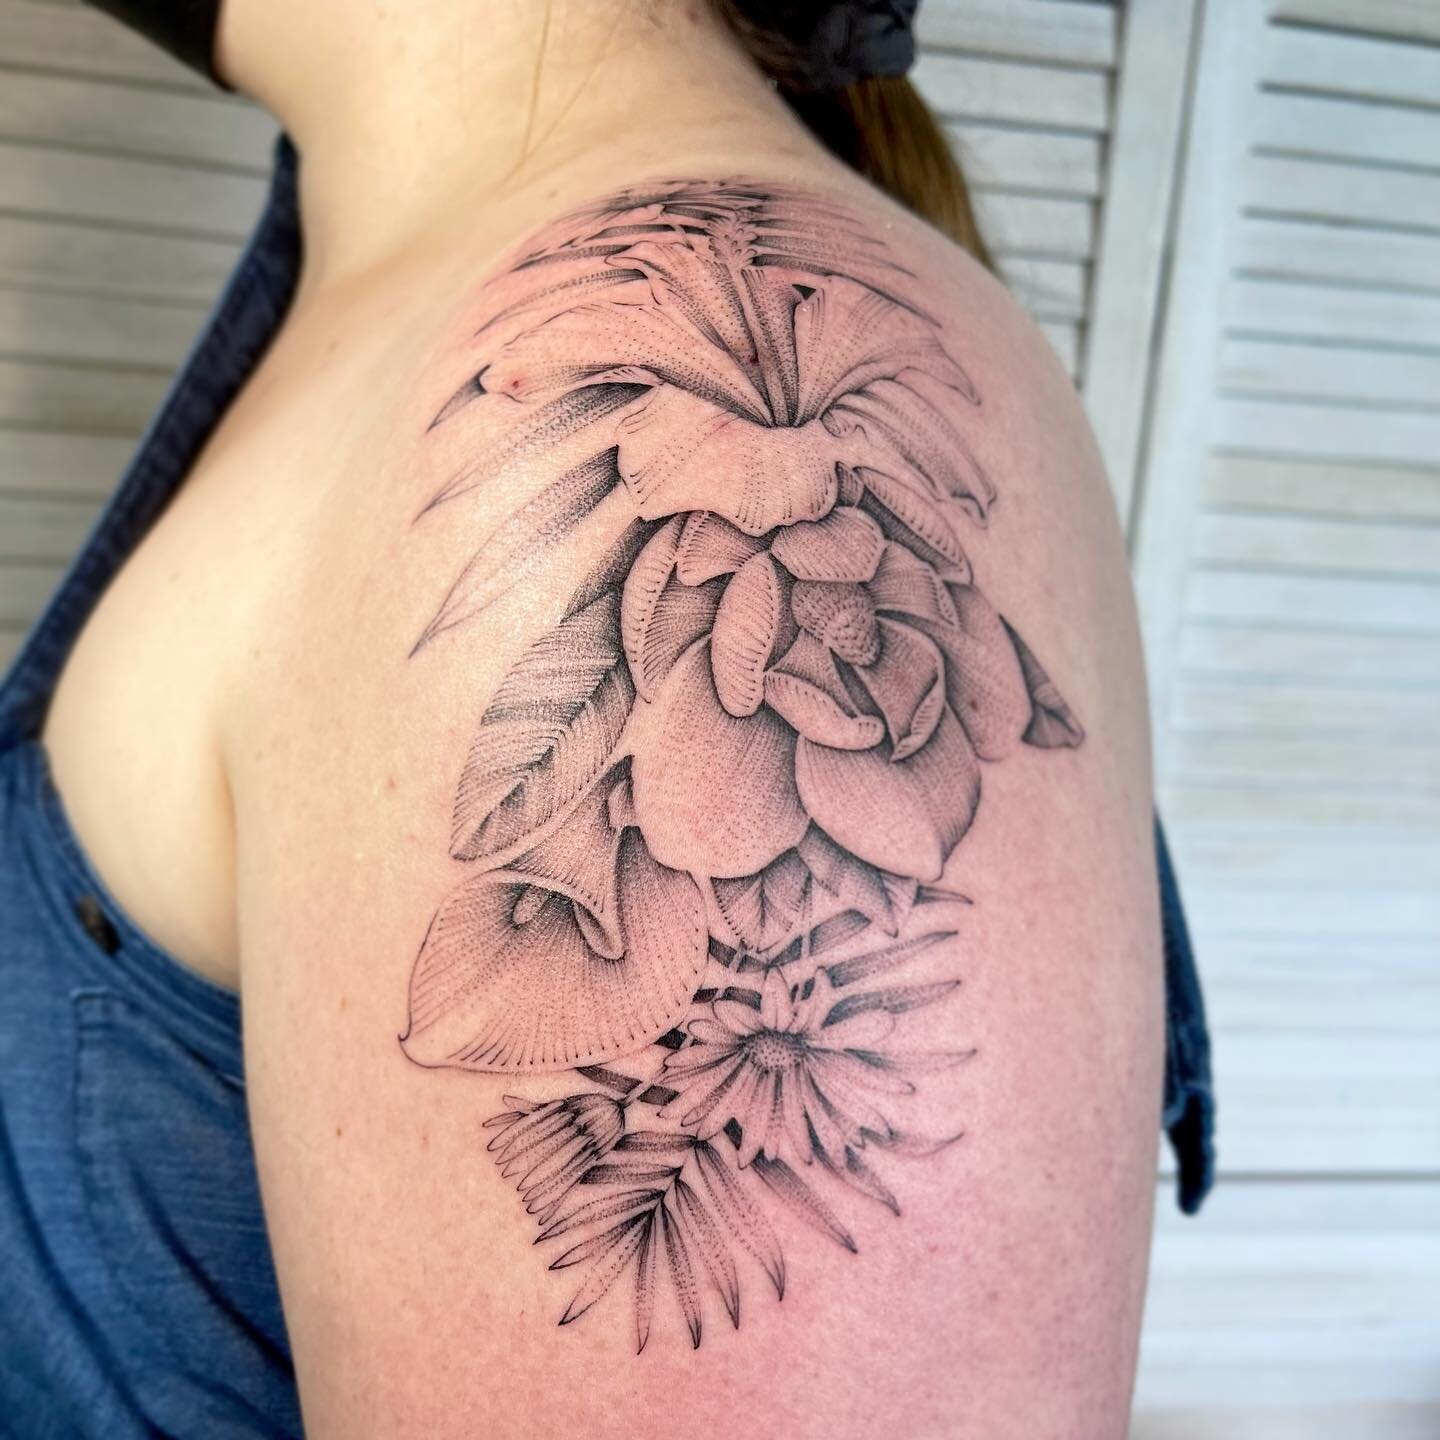 Magnolia, calla lily, hibiscus, daisies and palm leaves. A tropical representation of the women in her life. 
🌿🌿🌿
&hellip;
&hellip;
&hellip;
&hellip;
&hellip;
&hellip;
#dotworktattoo #finelinetattoo #bng #blackandgreytattoo #floraltattoo #flowers 